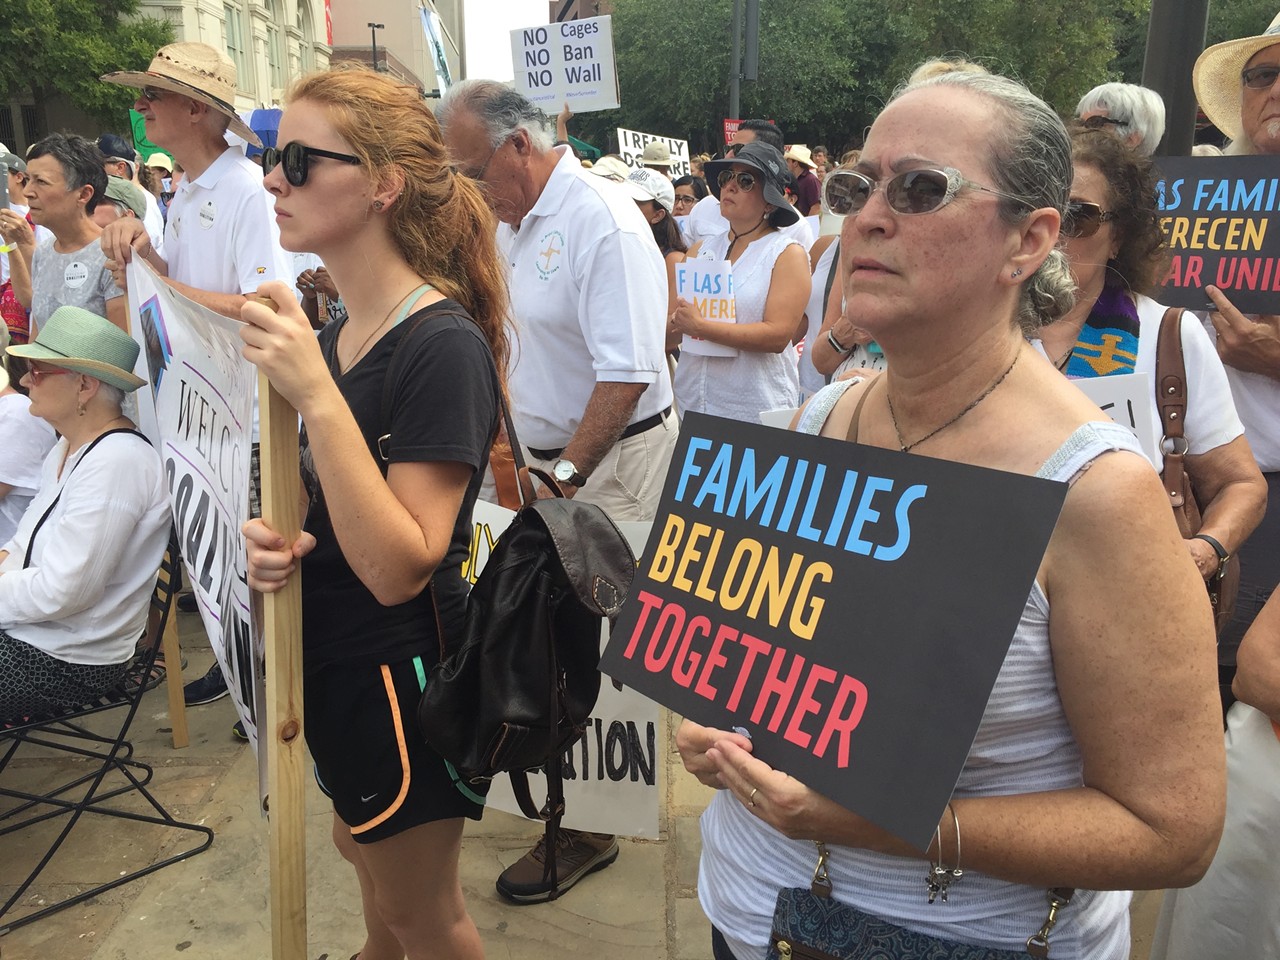 Demonstrators Rallied in Main Plaza to Protest Trump's "Zero Tolerance" Immigration Policy.